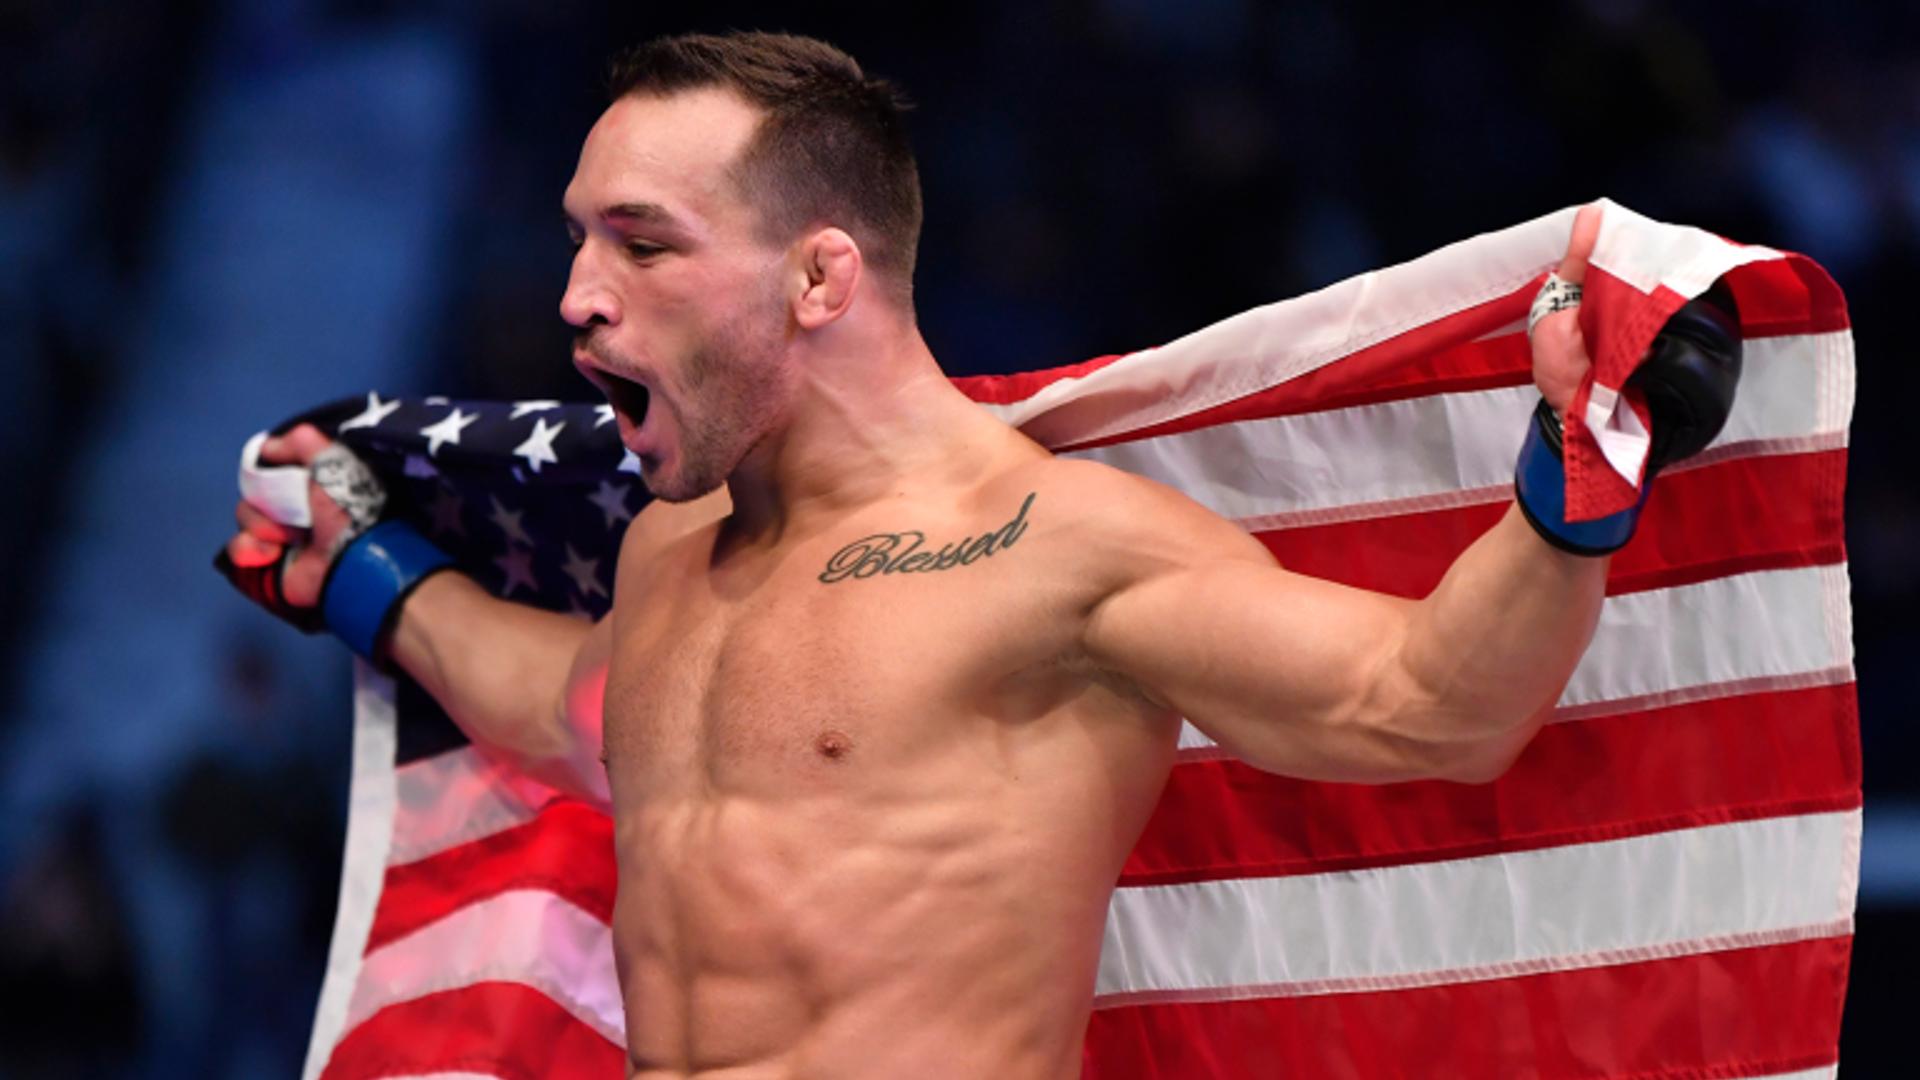 Michael Chandler fires back following Conor McGregor’s UFC fight canceling threat